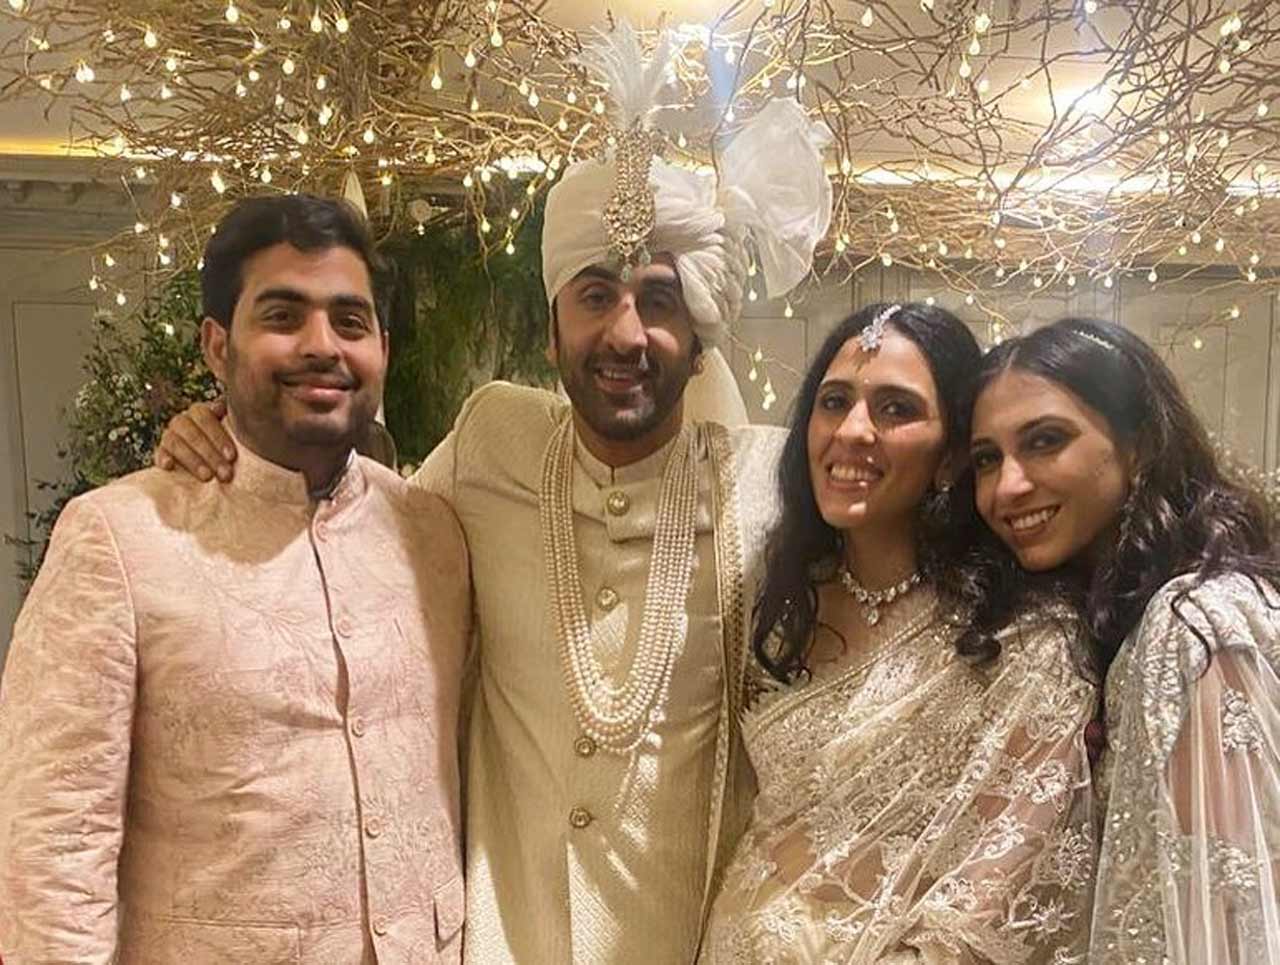 Post the pre-wedding festivities Neetu and Riddhima confirmed the wedding date (April 14, 2022) to the media personnel deployed outside Vastu to capture the glimpses of the ceremony.
In picture: Aakash Ambani and Shloka Mehta with Ranbir Kapoor and Anissa Malhotra.